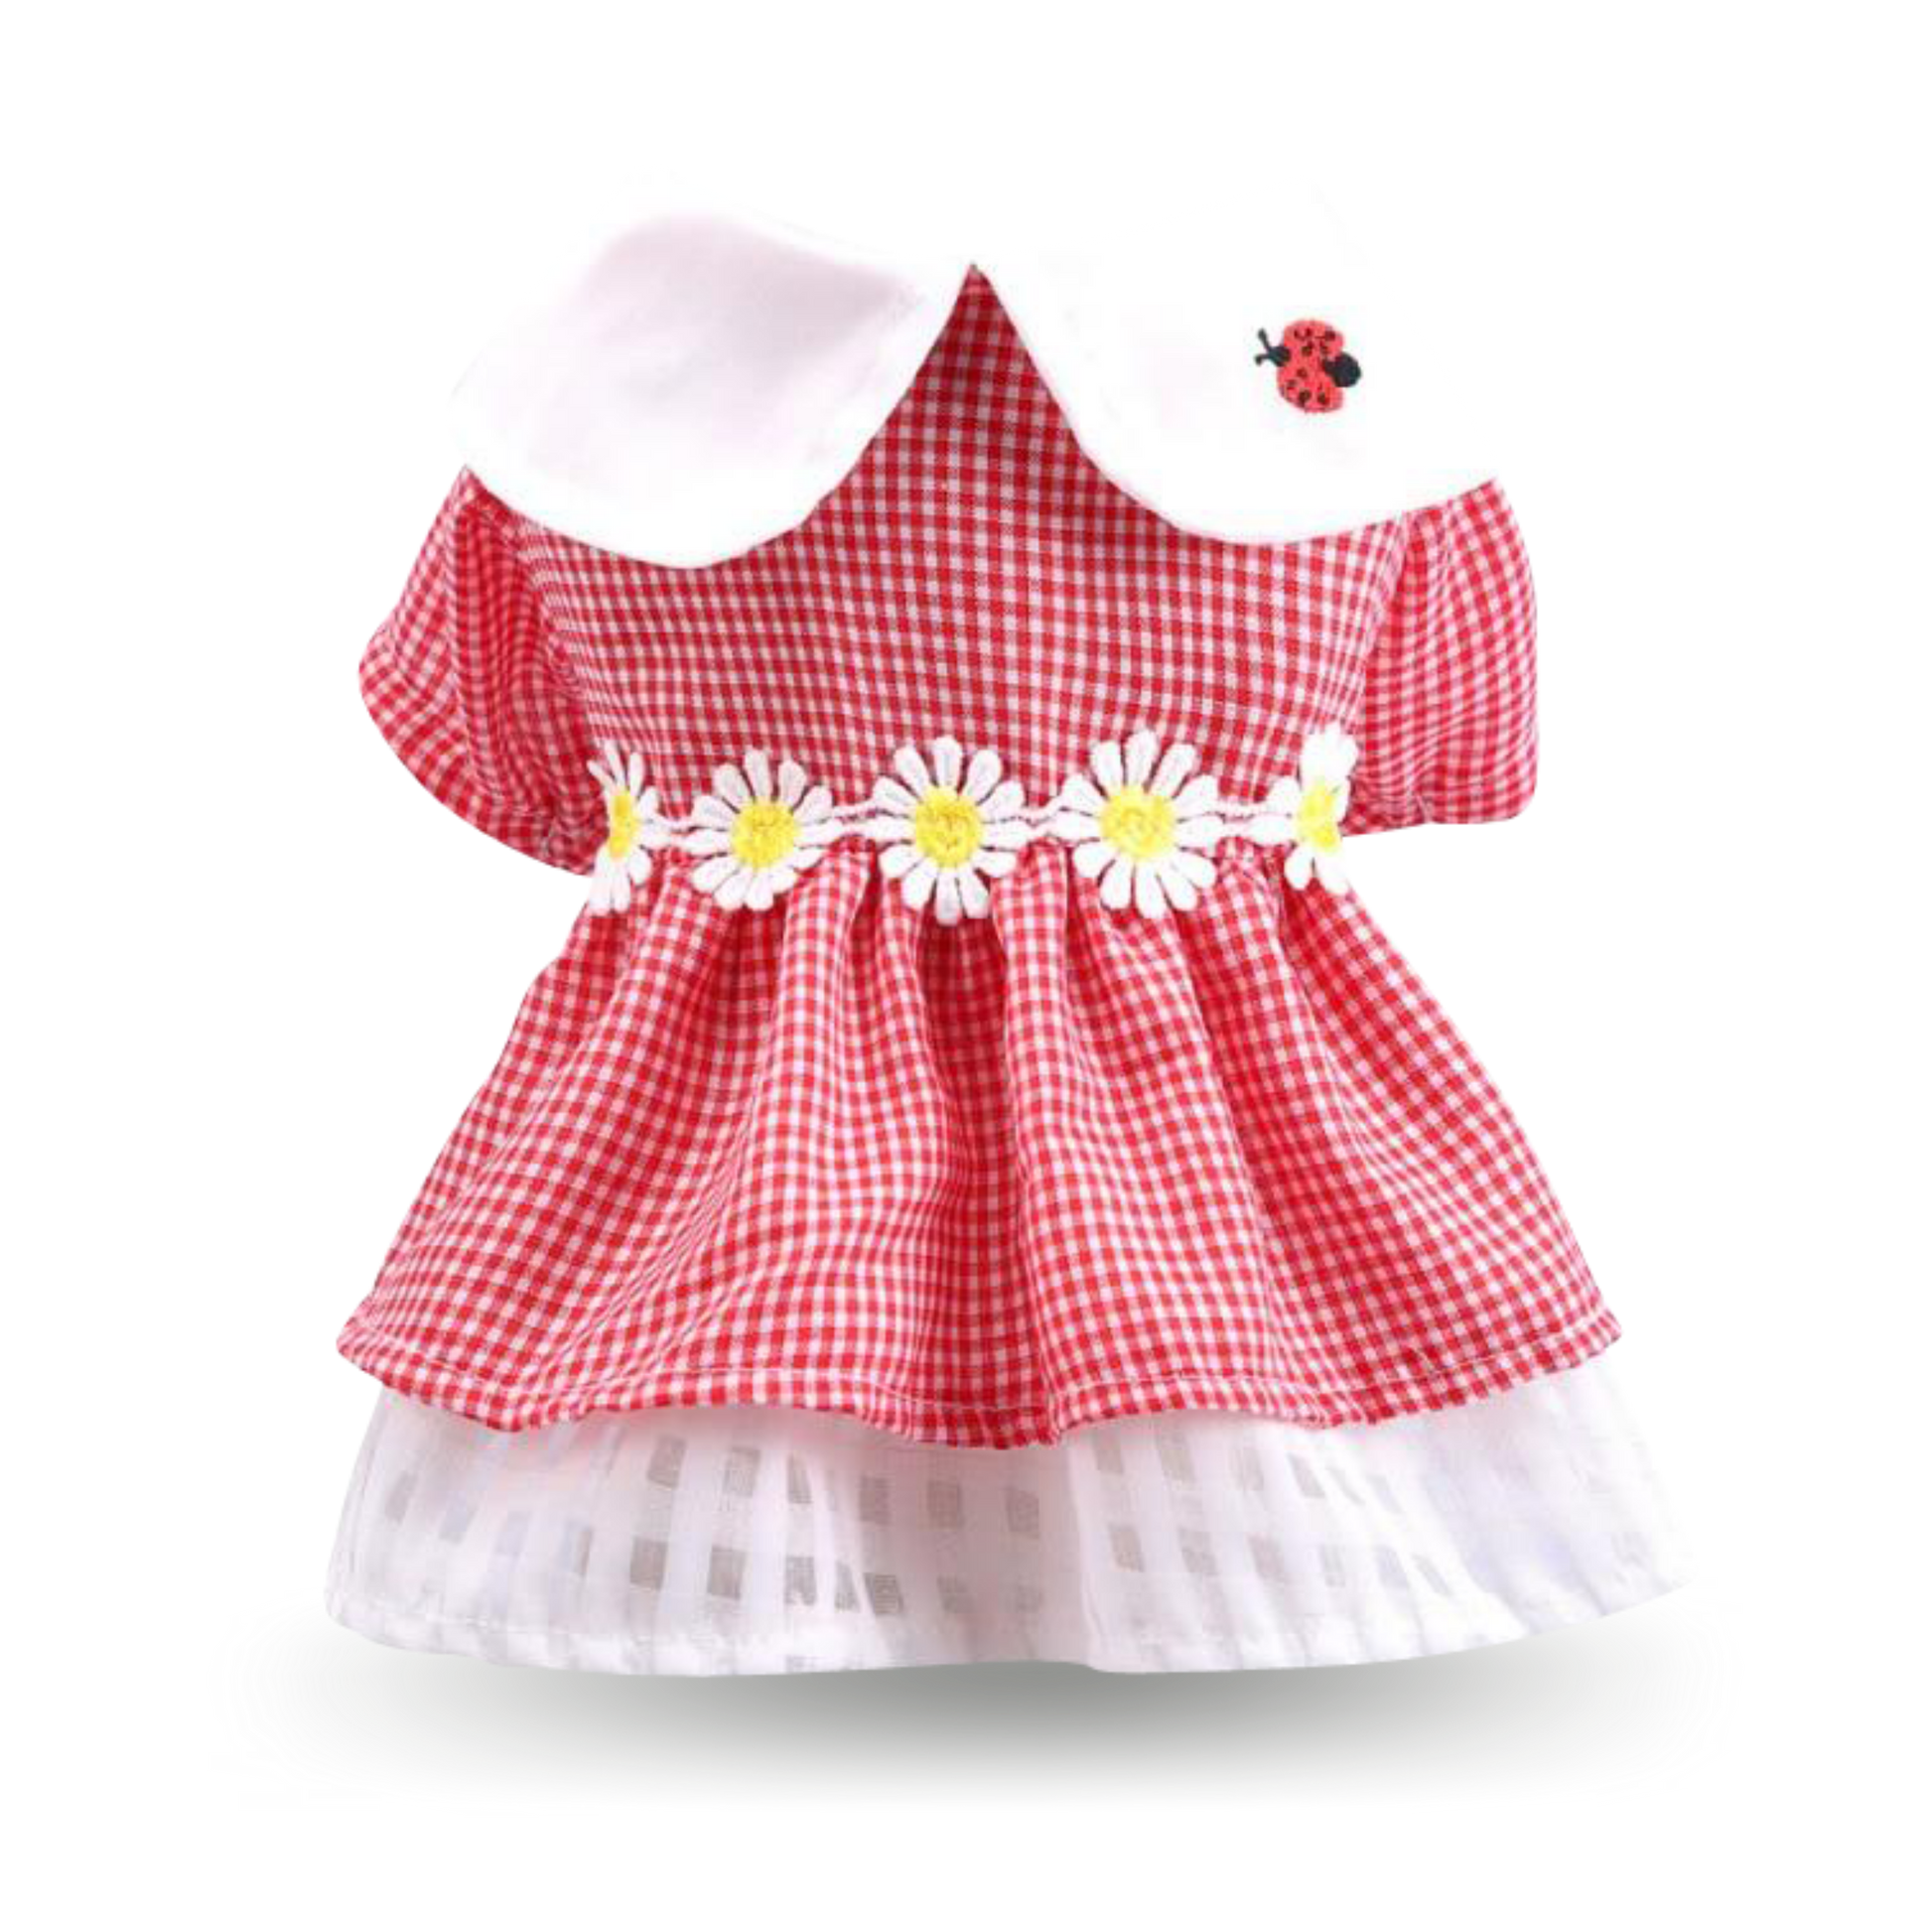 Soft light-weight red cotton dress with flowers at the waist and a Lady bug embroidered on the collar 